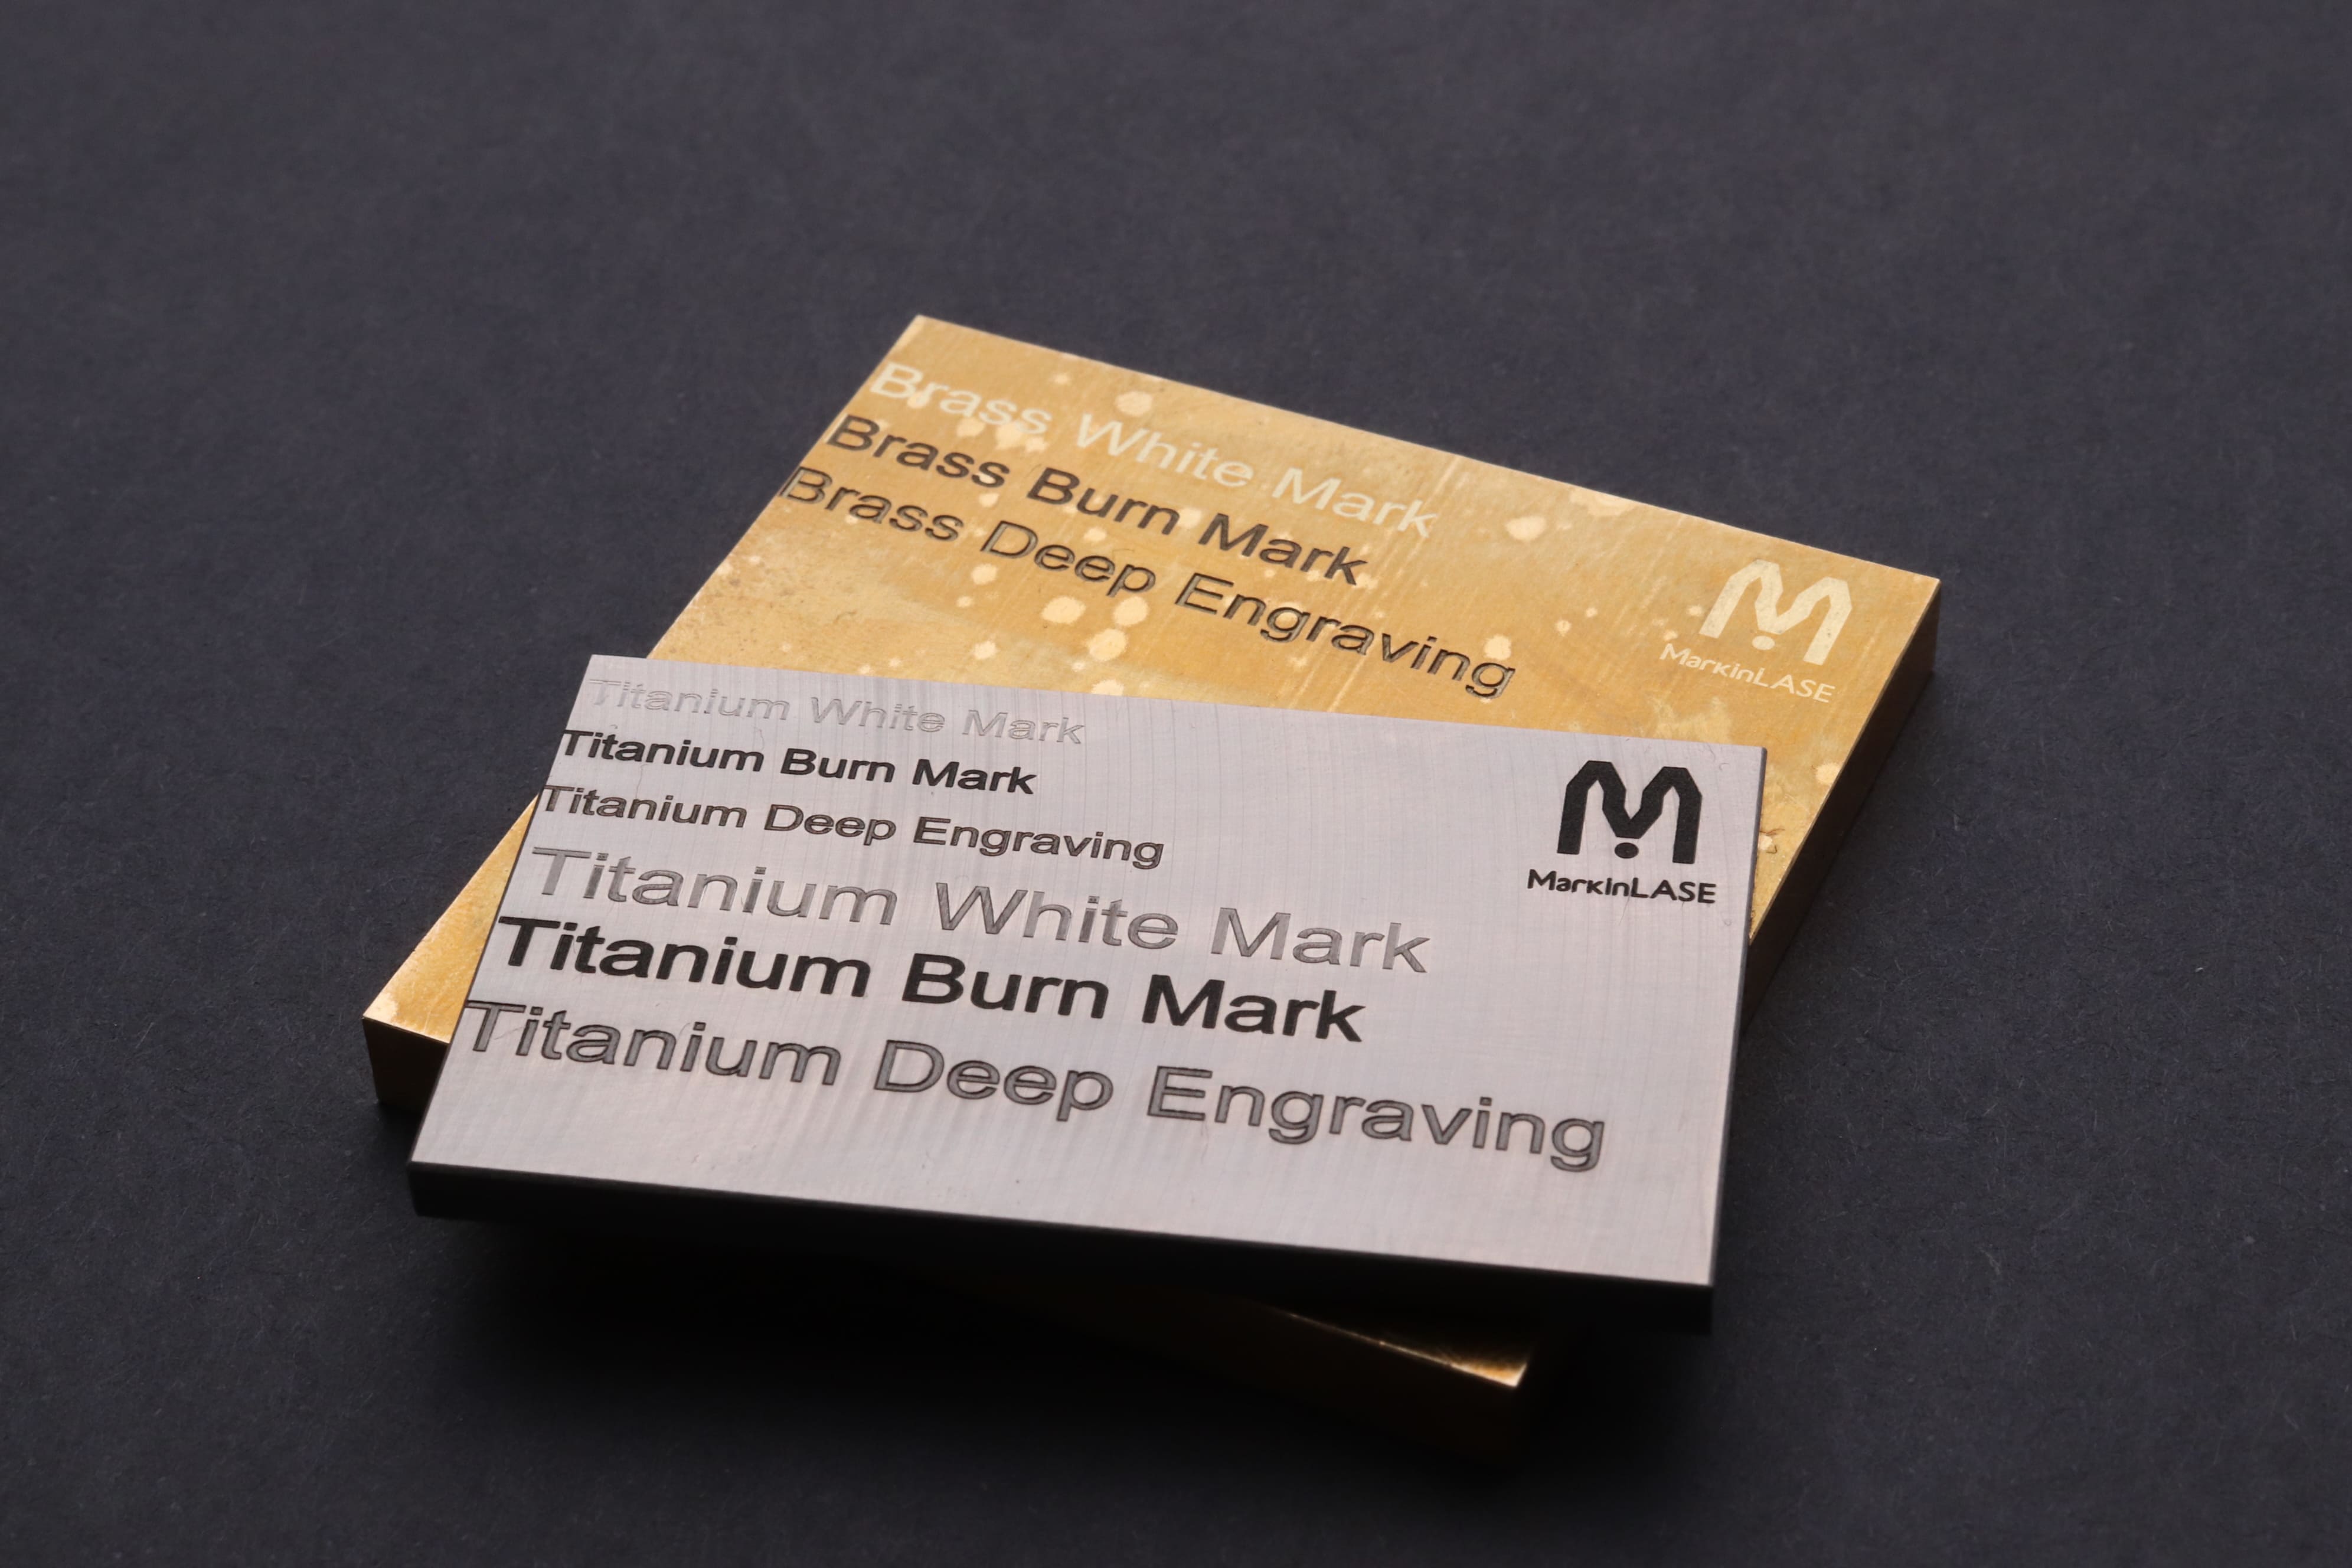 Image of 2 thick plates of titanium and brass materials with MarkinLase logo for all and 'Titanium White Mark, Titanium Burn Mark, Titanium Deep Engraving and Brass White Mark', 'Brass Burn Mark, Brass Deep Engraving' for each.